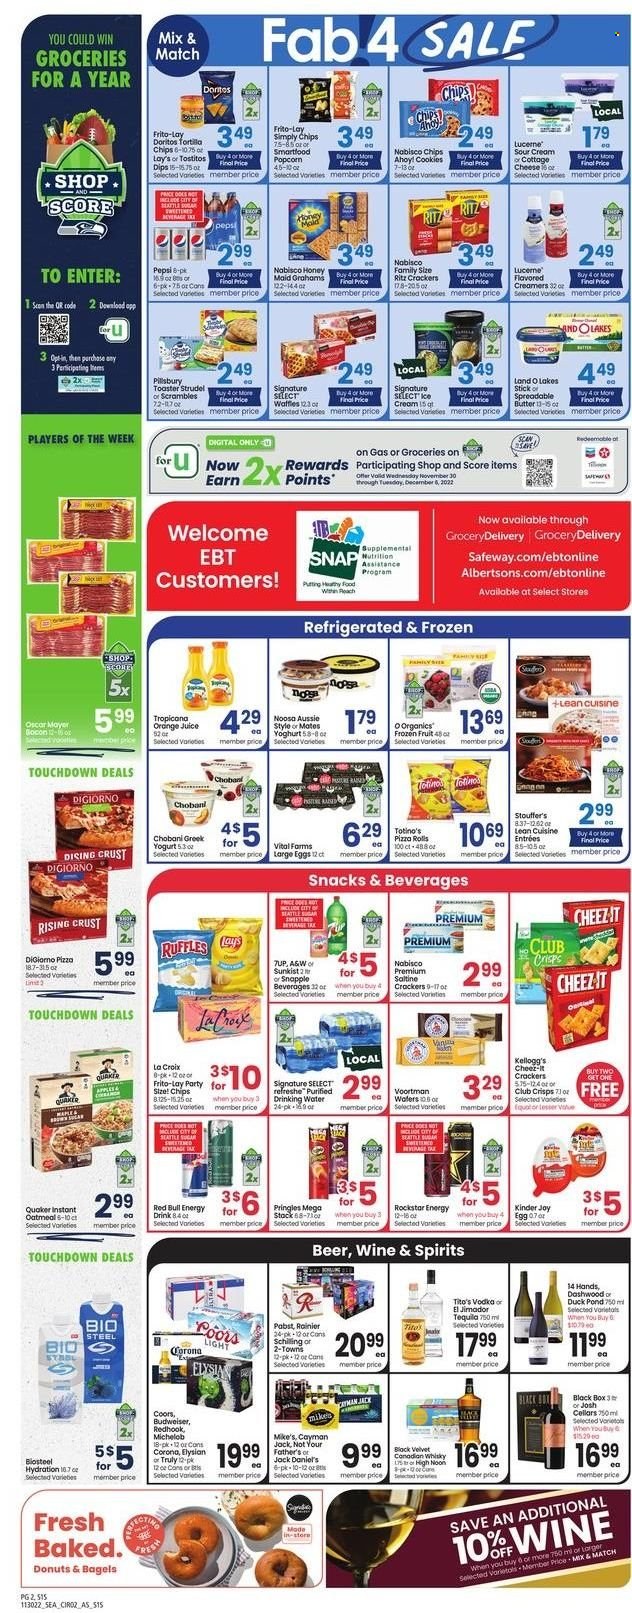 thumbnail - Safeway Flyer - 11/30/2022 - 12/06/2022 - Sales products - bagels, pizza rolls, strudel, donut, waffles, Jack Daniel's, pizza, Pillsbury, Quaker, Lean Cuisine, Oscar Mayer, yoghurt, Chobani, large eggs, butter, sour cream, Stouffer's, cookies, snack, Kinder Joy, crackers, Kellogg's, Chips Ahoy!, RITZ, Doritos, tortilla chips, Pringles, Lay’s, Smartfood, popcorn, Frito-Lay, Cheez-It, Ruffles, Tostitos, oatmeal, Honey Maid, Pepsi, orange juice, juice, Red Bull, Snapple, A&W, Rockstar, L'Or, wine, canadian whisky, tequila, vodka, TRULY, whisky, beer, Corona Extra, Fab, Aussie, Budweiser, Coors, Michelob. Page 2.